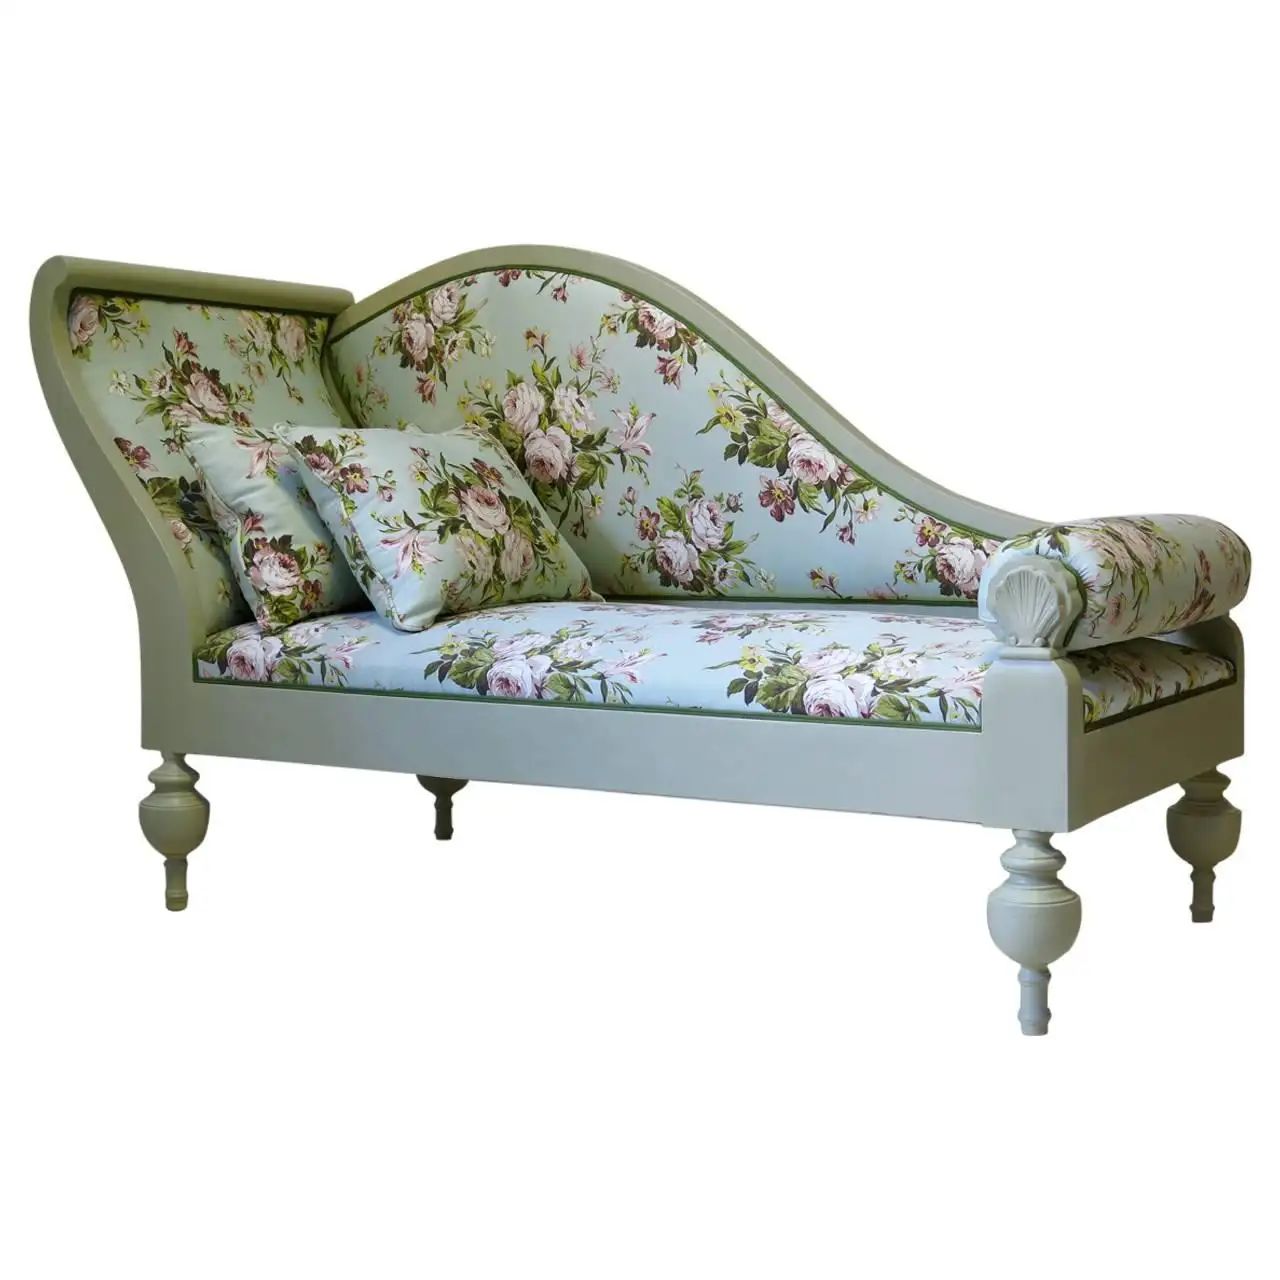 French Baroque Style Chintz-Upholstered Daybed, circa 1940s | 1stDibs